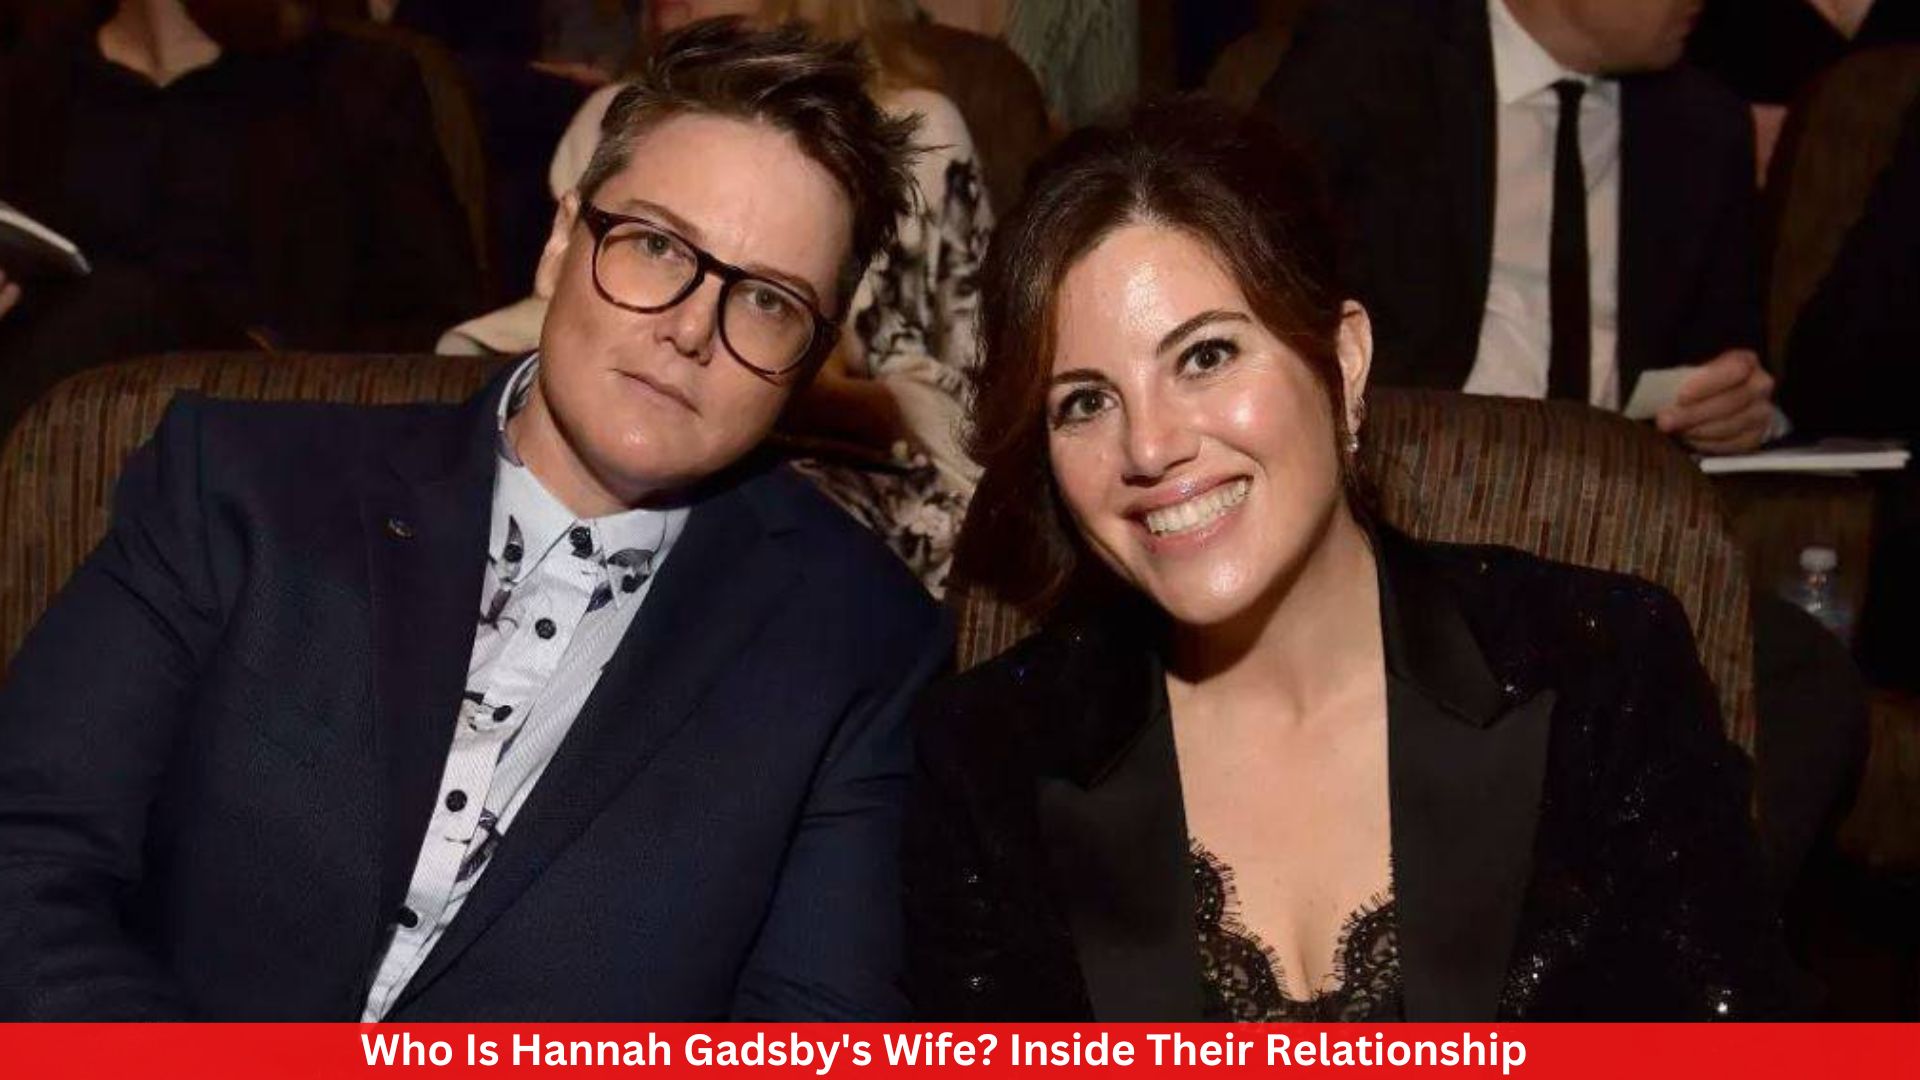 Who Is Hannah Gadsby's Wife? Inside Their Relationship